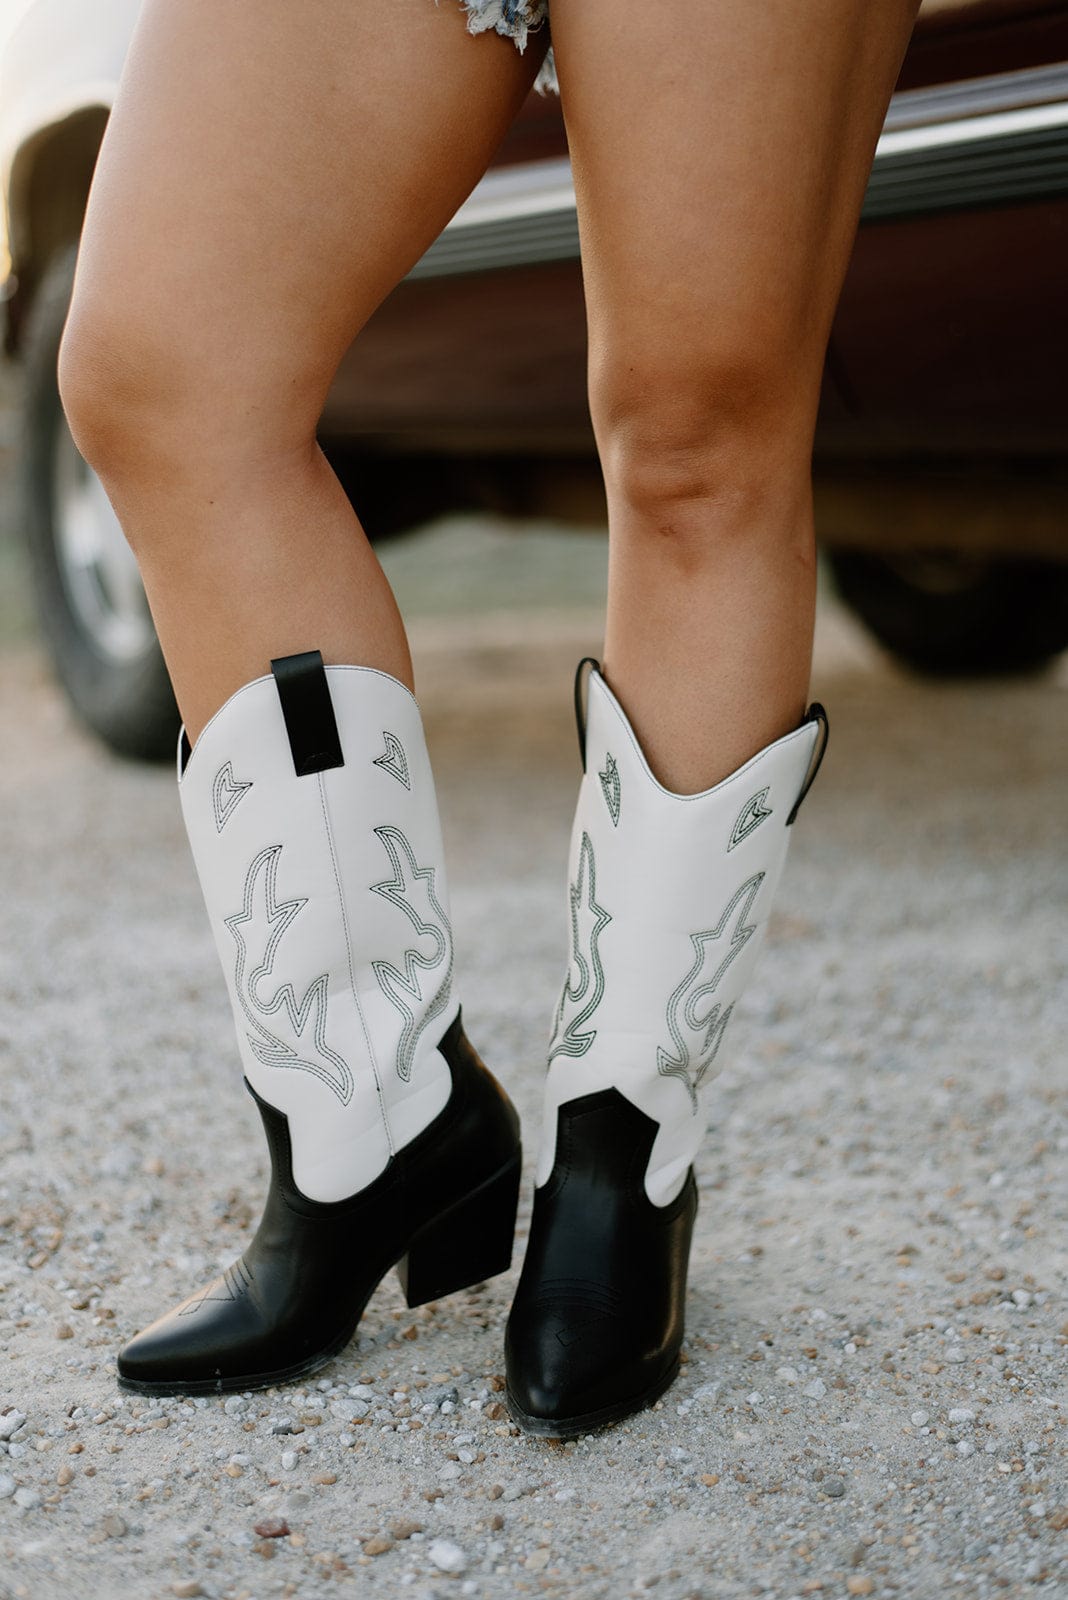 Black & White Western Cowgirl Boots